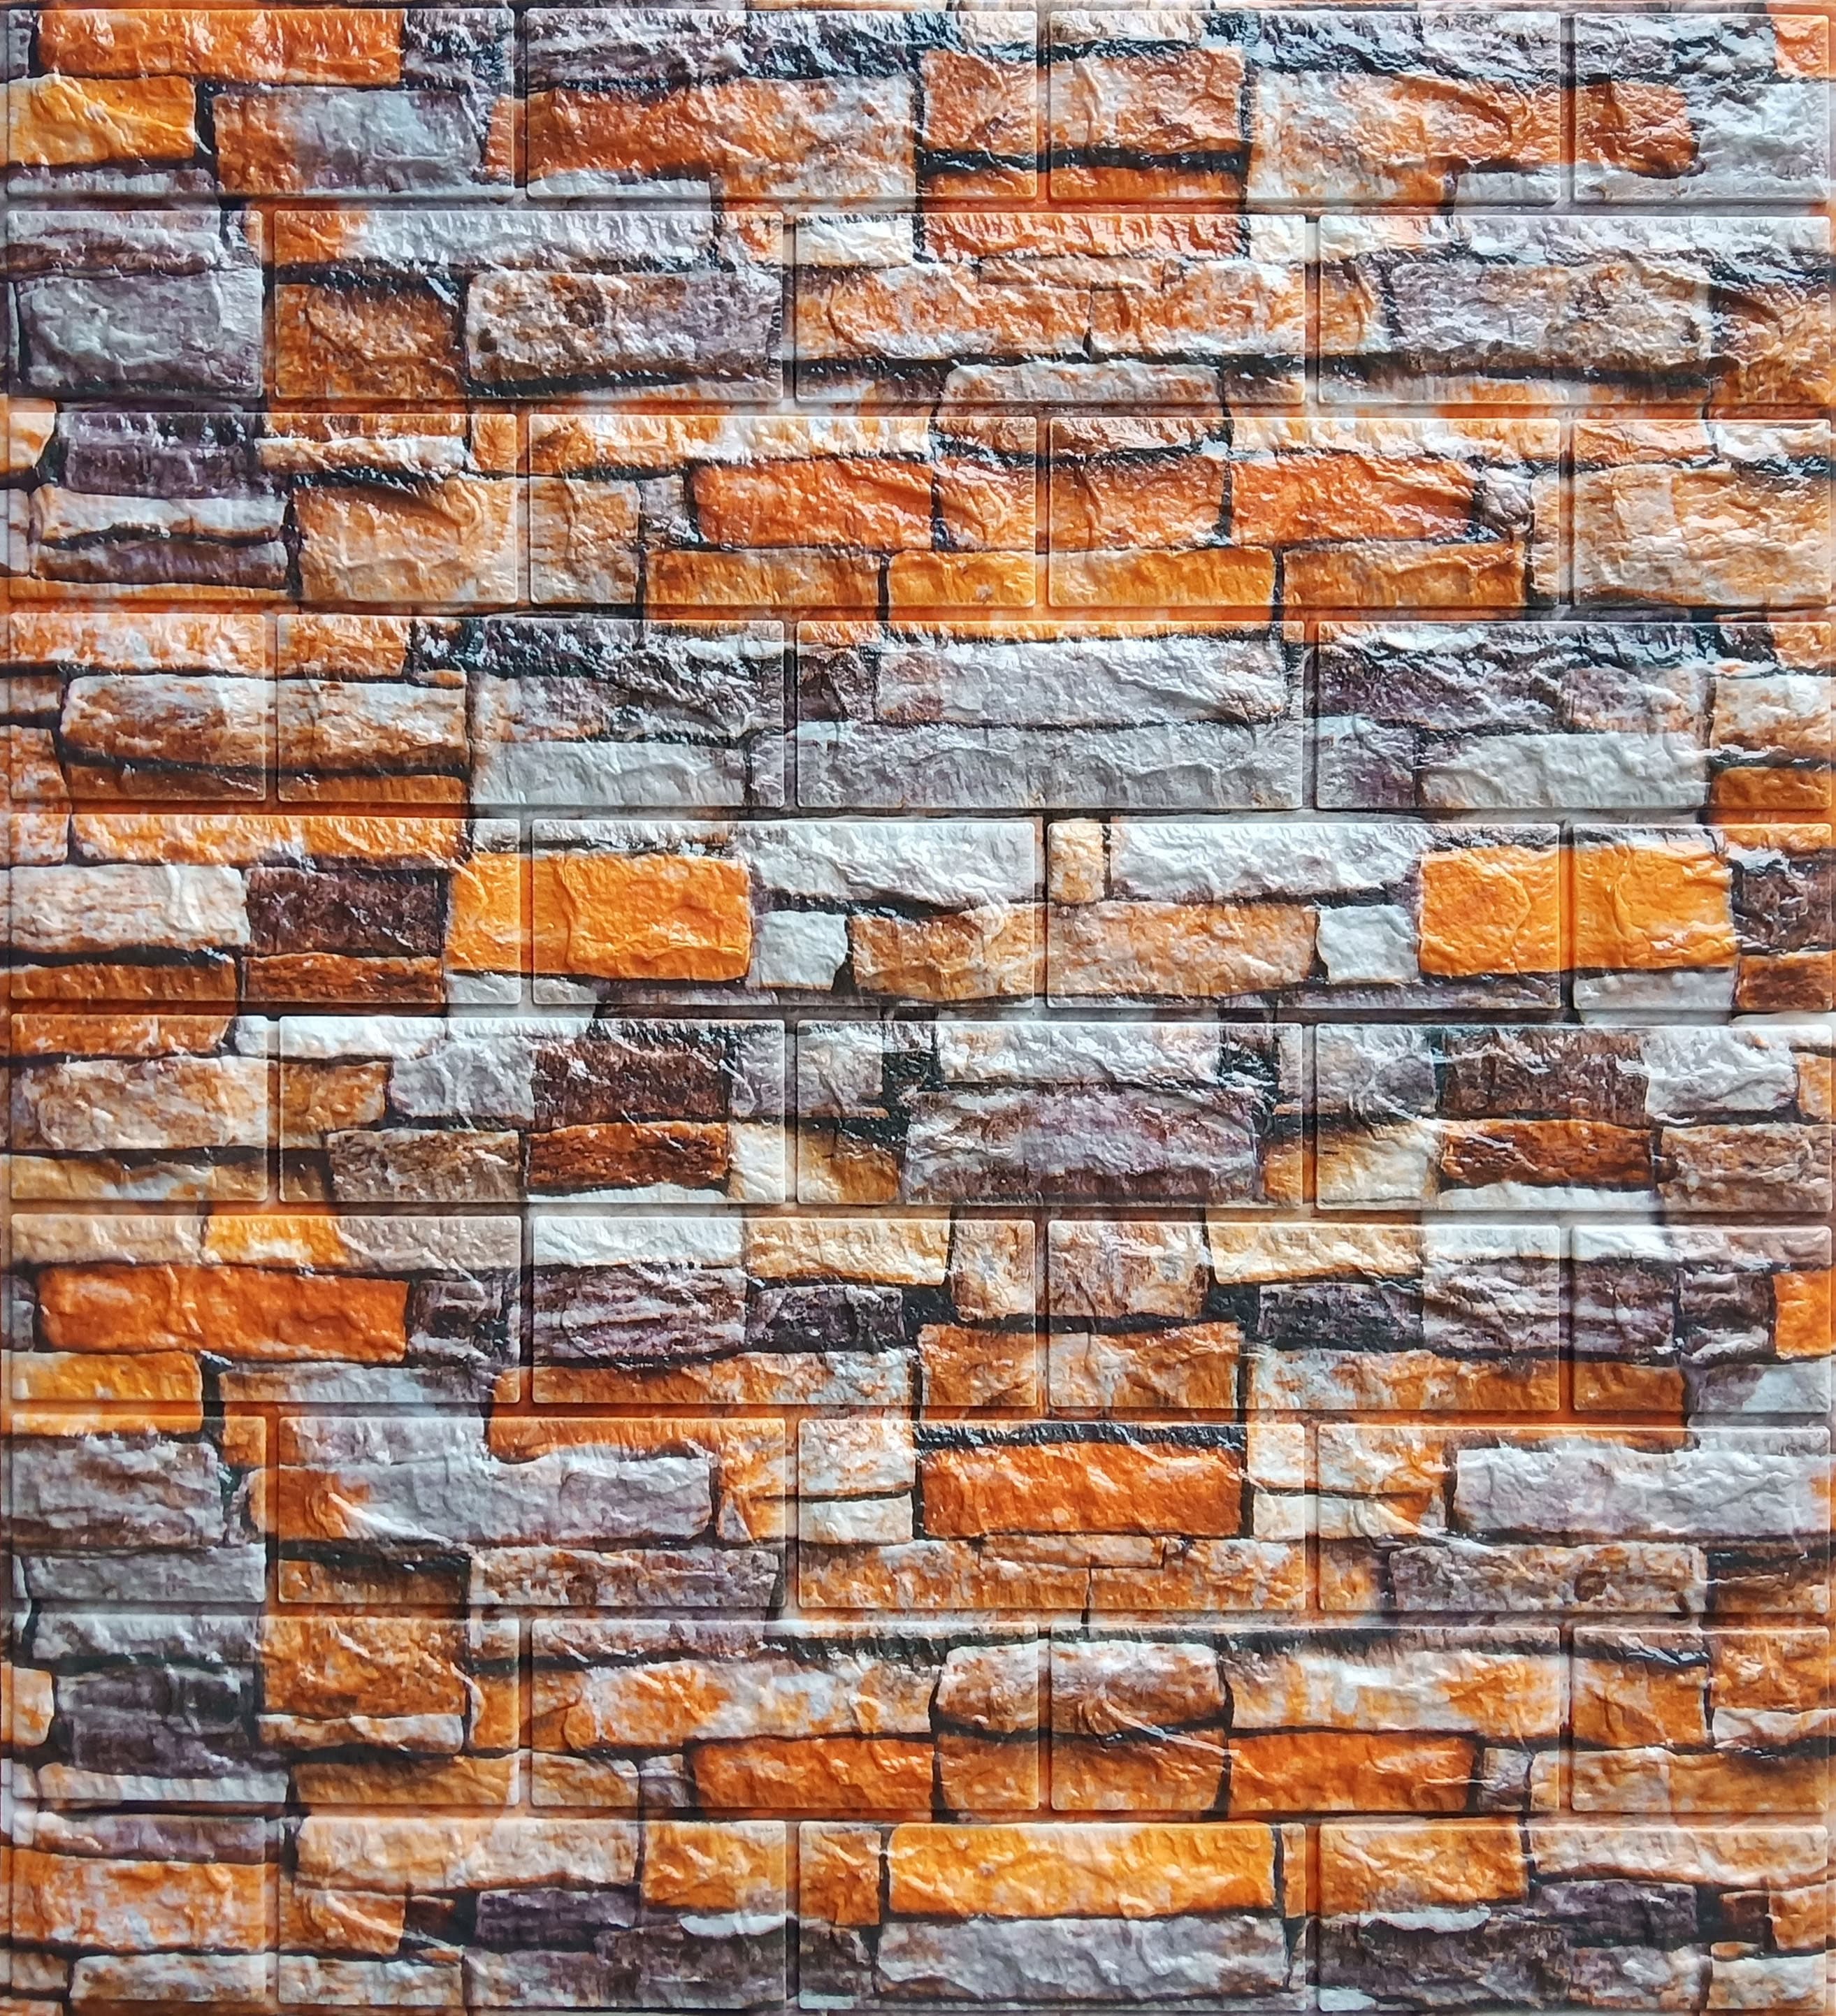 WALL!SUPPLY 20-in x 48-in Embossed White Eps Foam Faux Brick Wall Panel  (4-Pack) in the Wall Panels department at